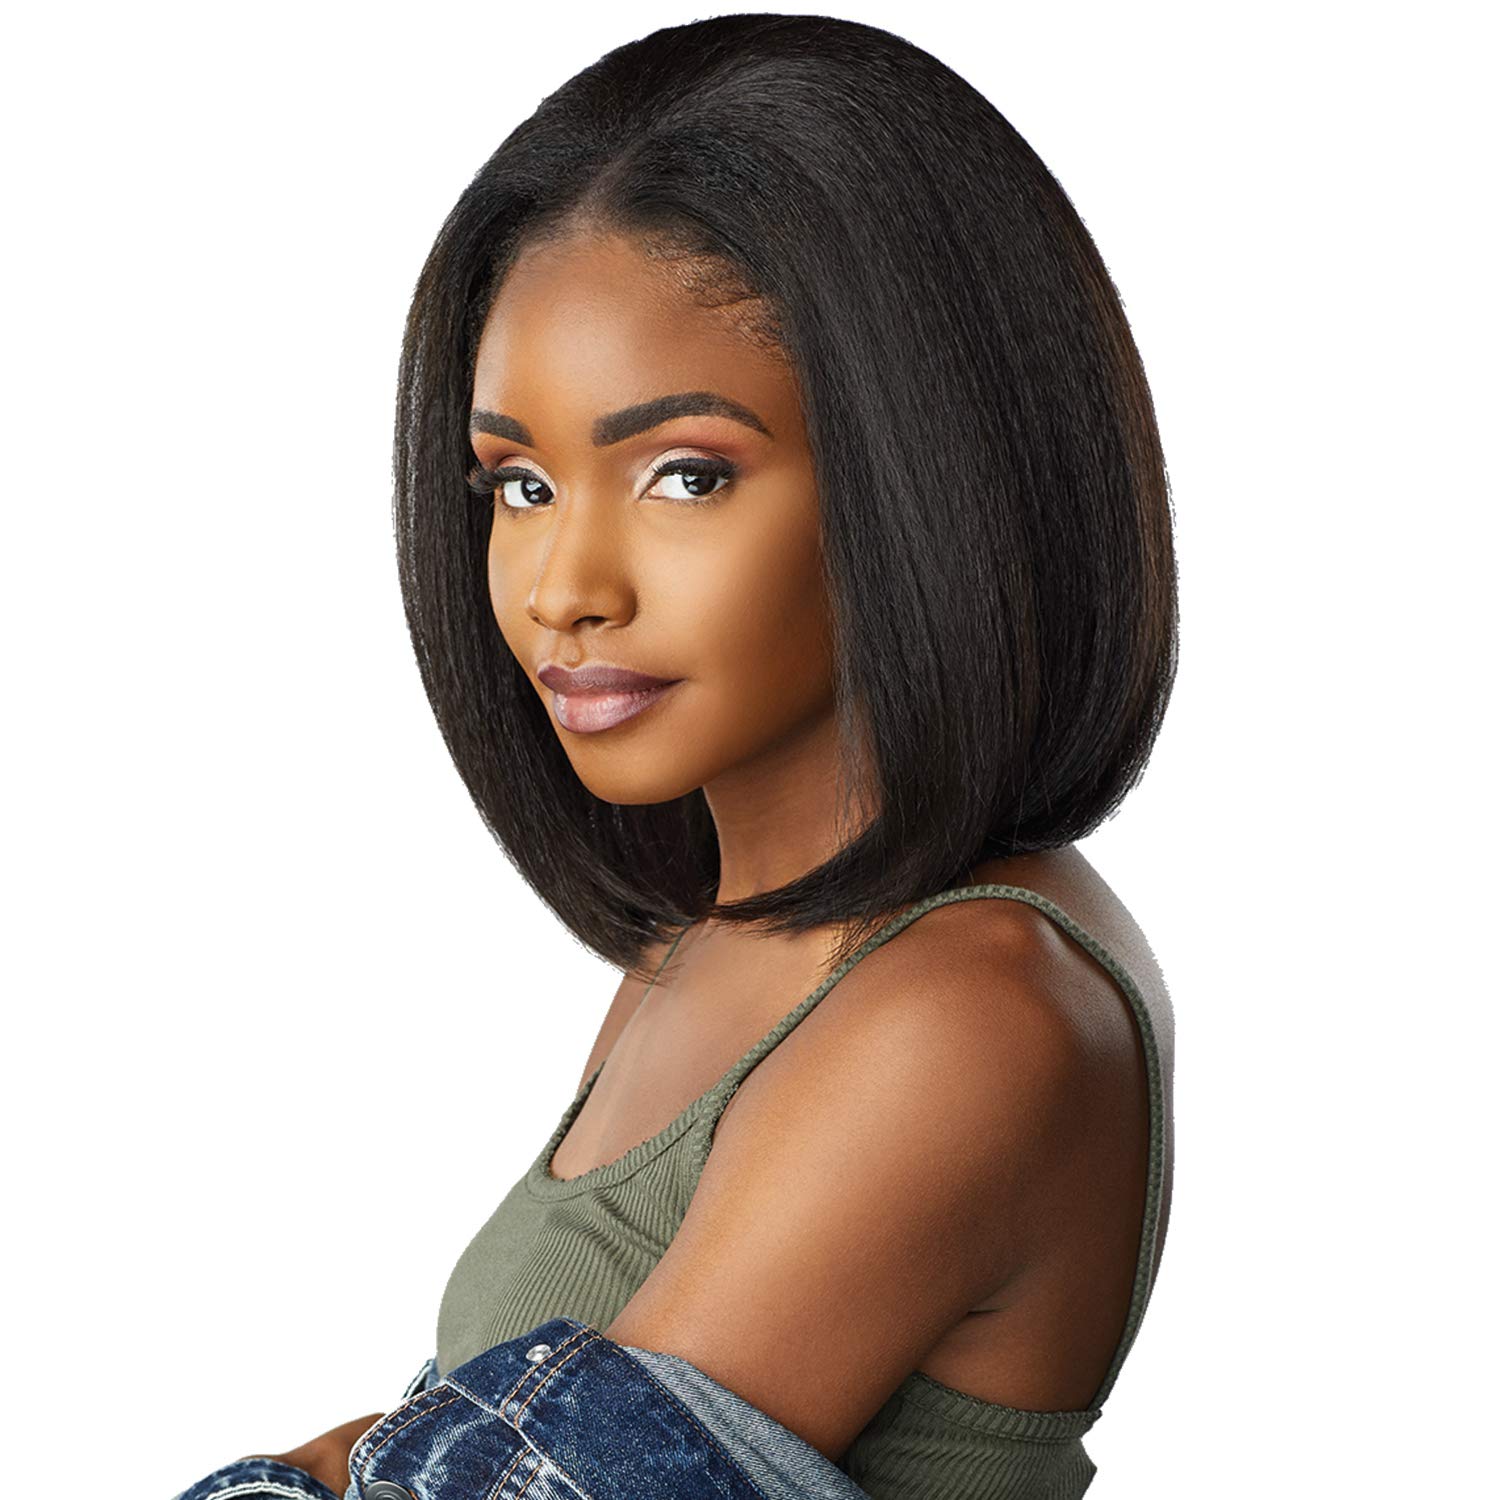 Sensationnel CKCo HalfWig - Synthetic Instant weave full wig style CURLS KINKS AND CO Half wig - TOP BABE (1B) Find Your New Look Today!